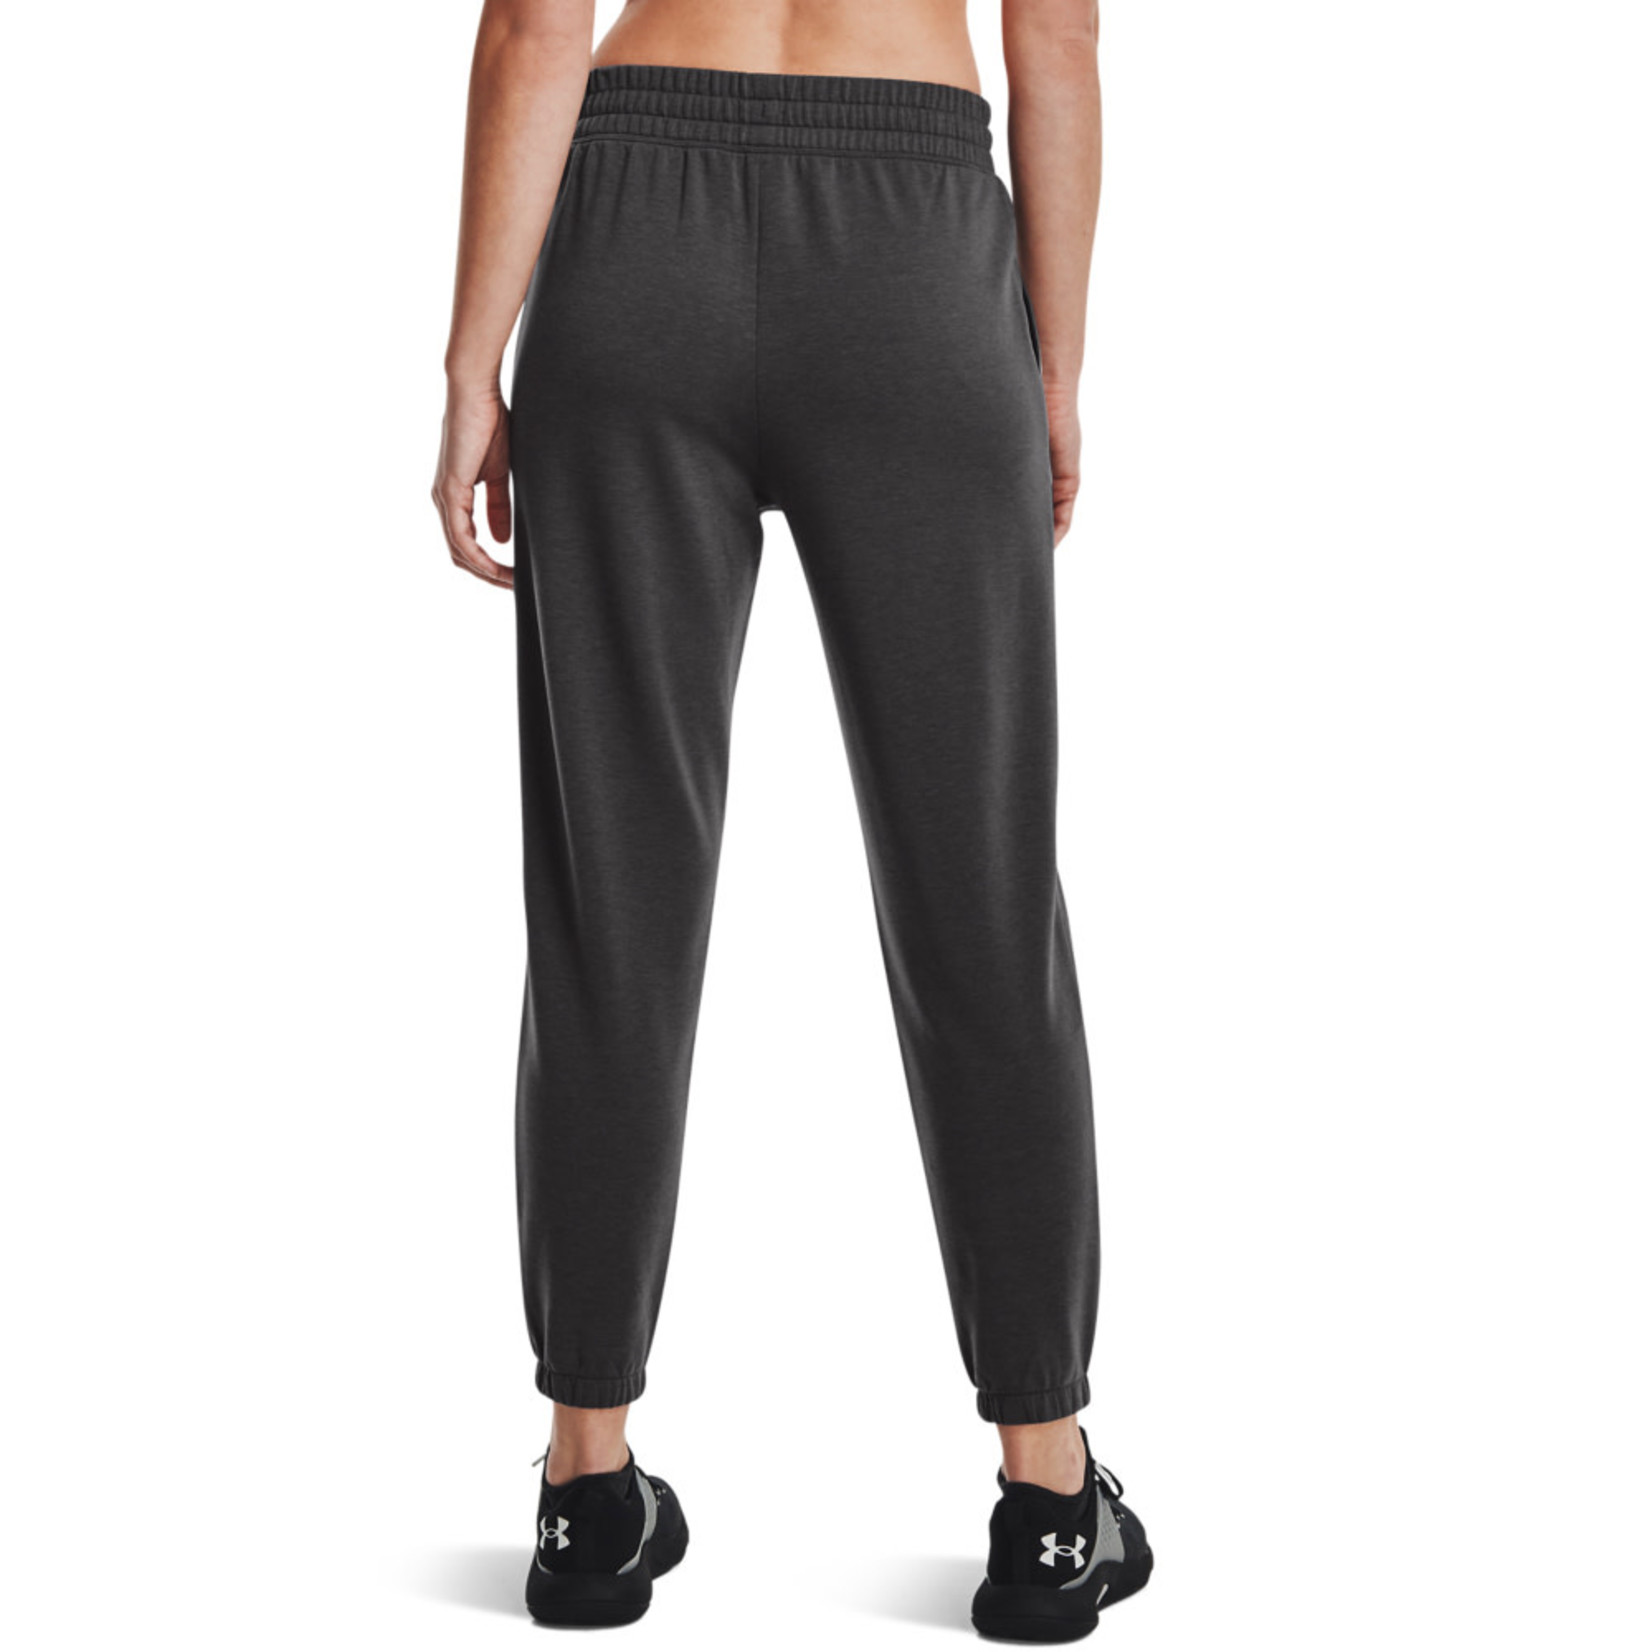 Under Armour Rival Terry Jogger-GRY